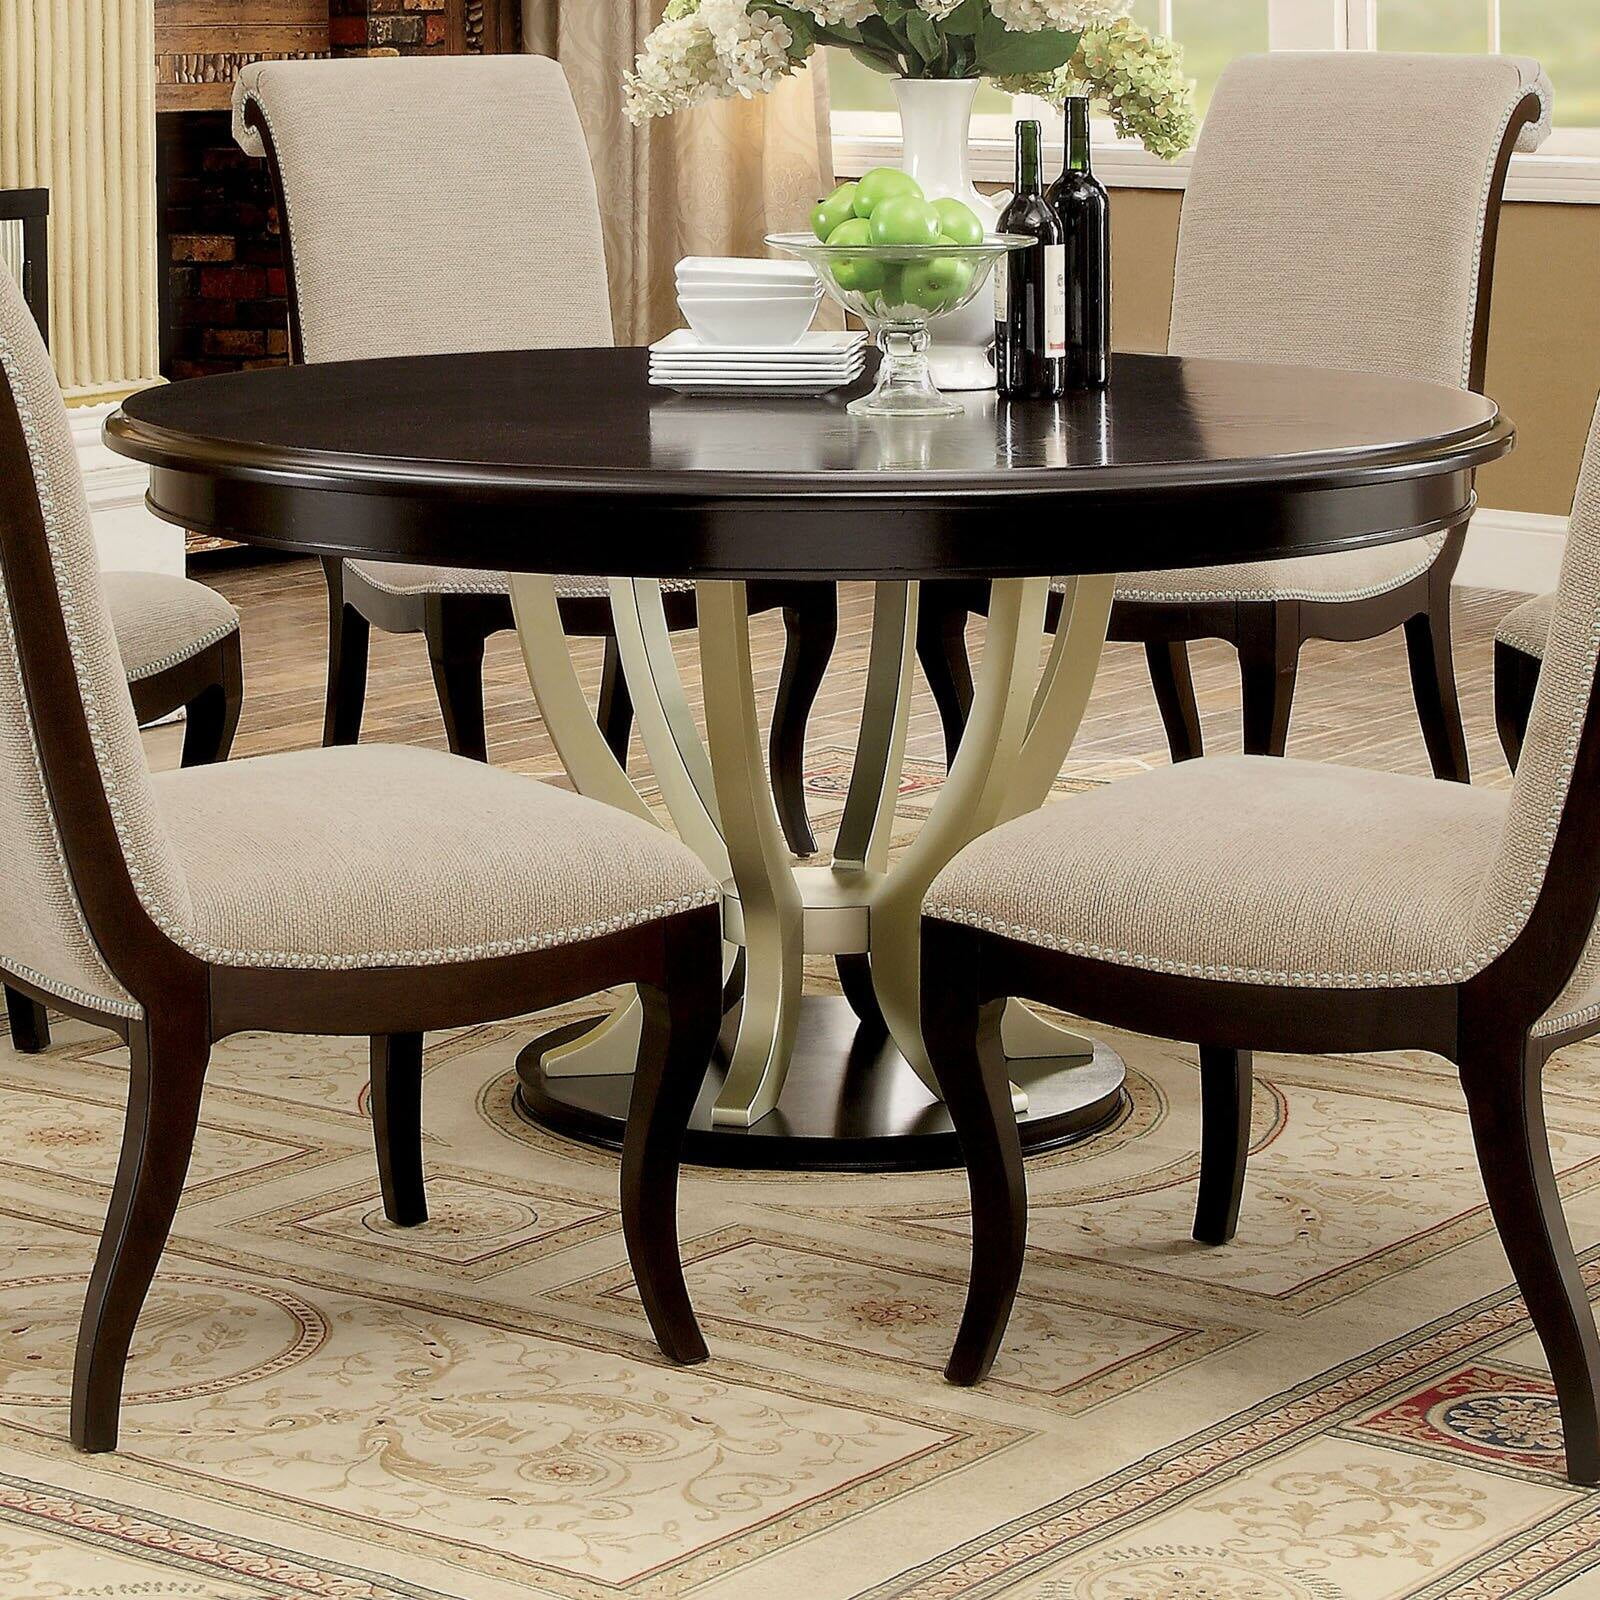  American Furniture Dining Tables for Large Space